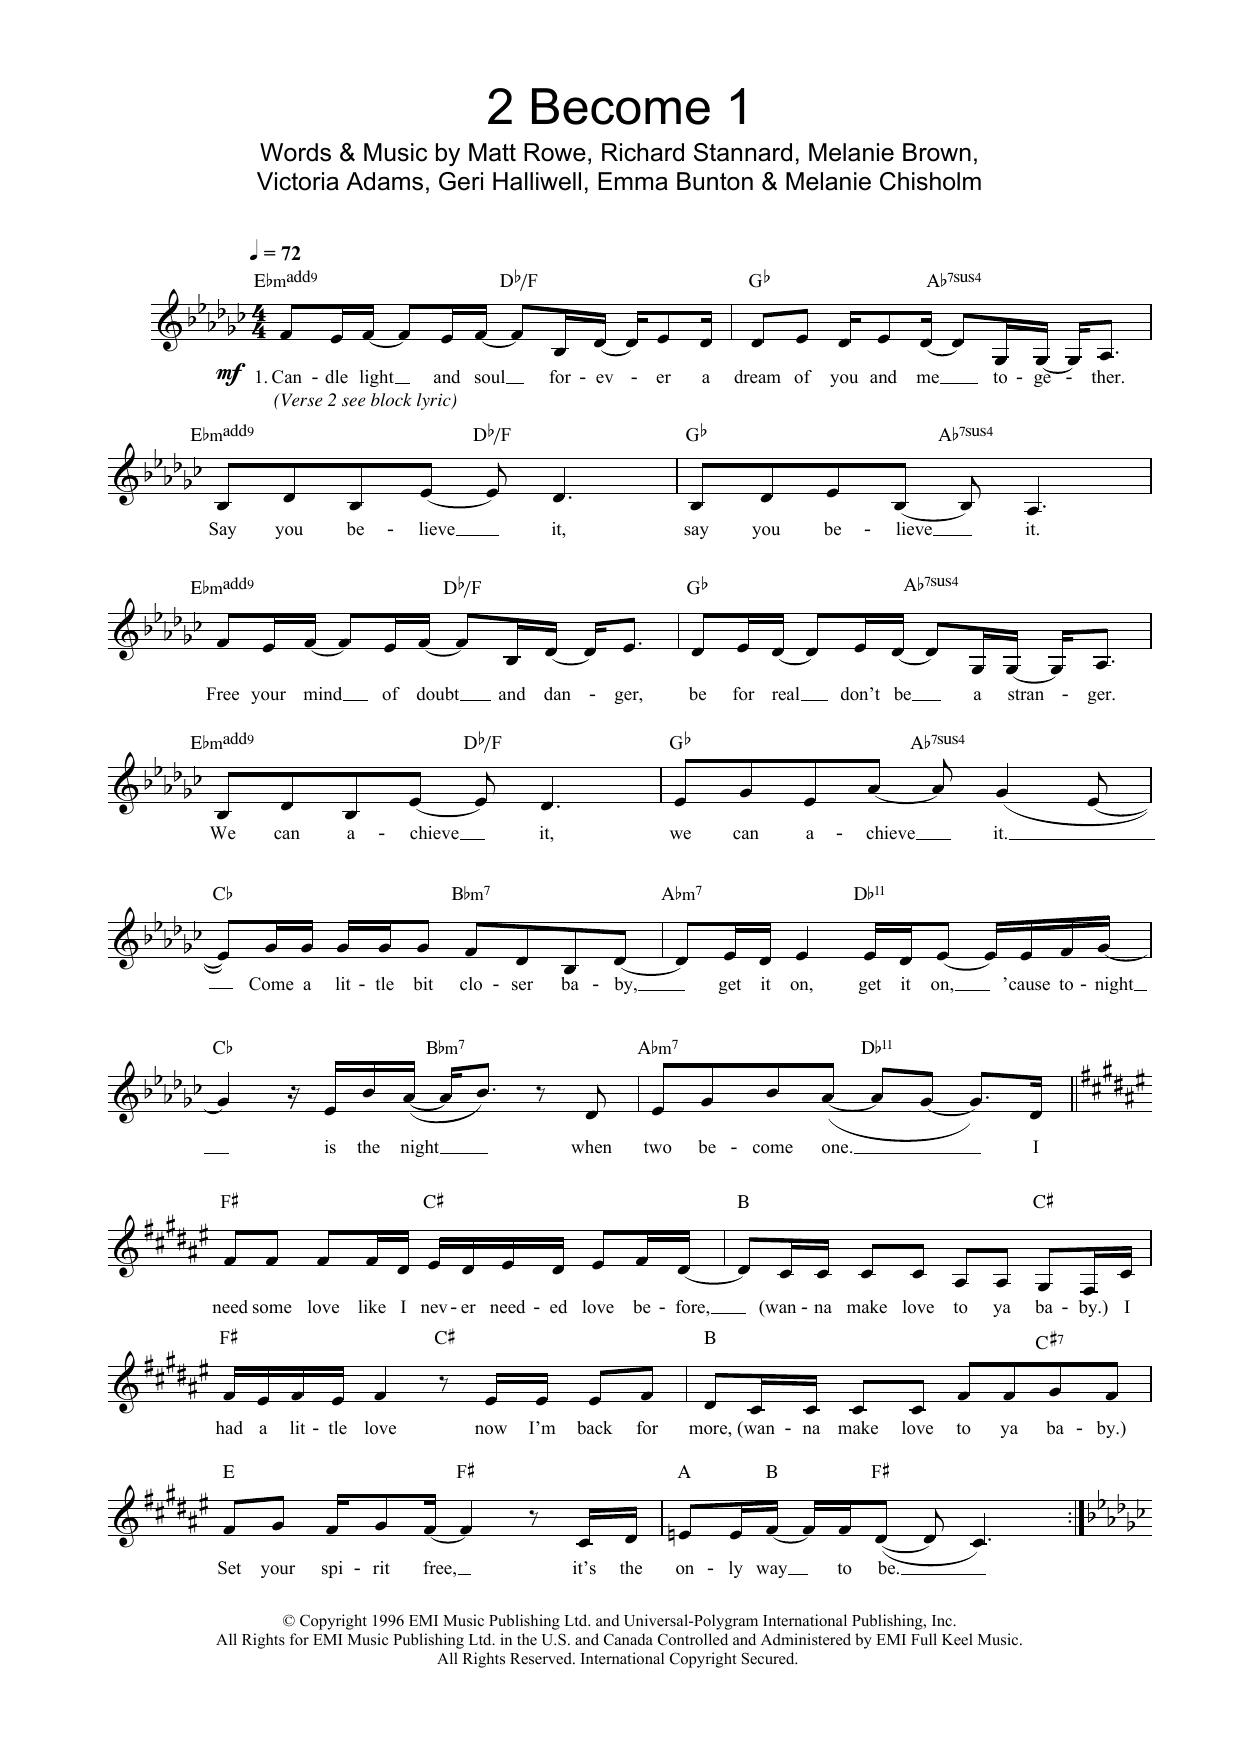 Download Spice Girls 2 Become 1 Sheet Music